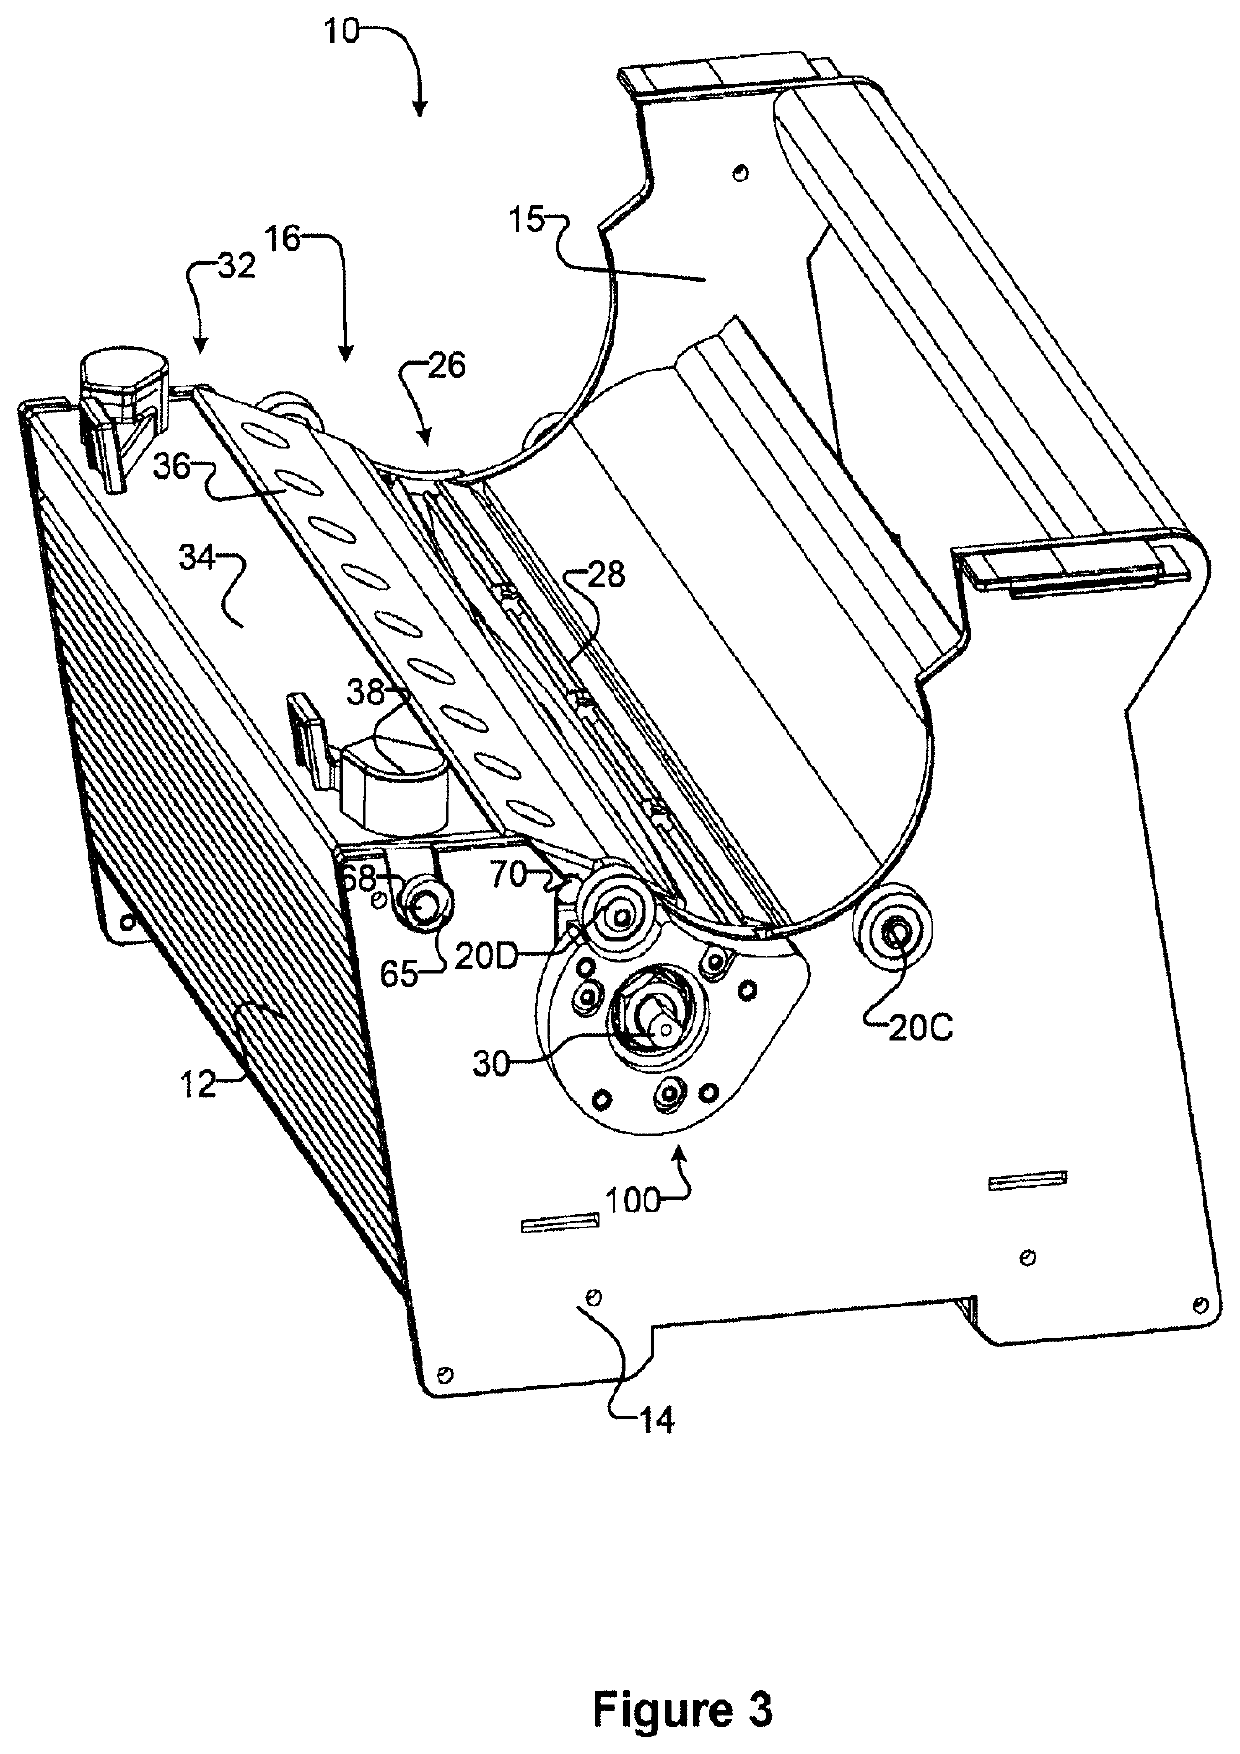 Bearing block assembly for a plant trimming machine